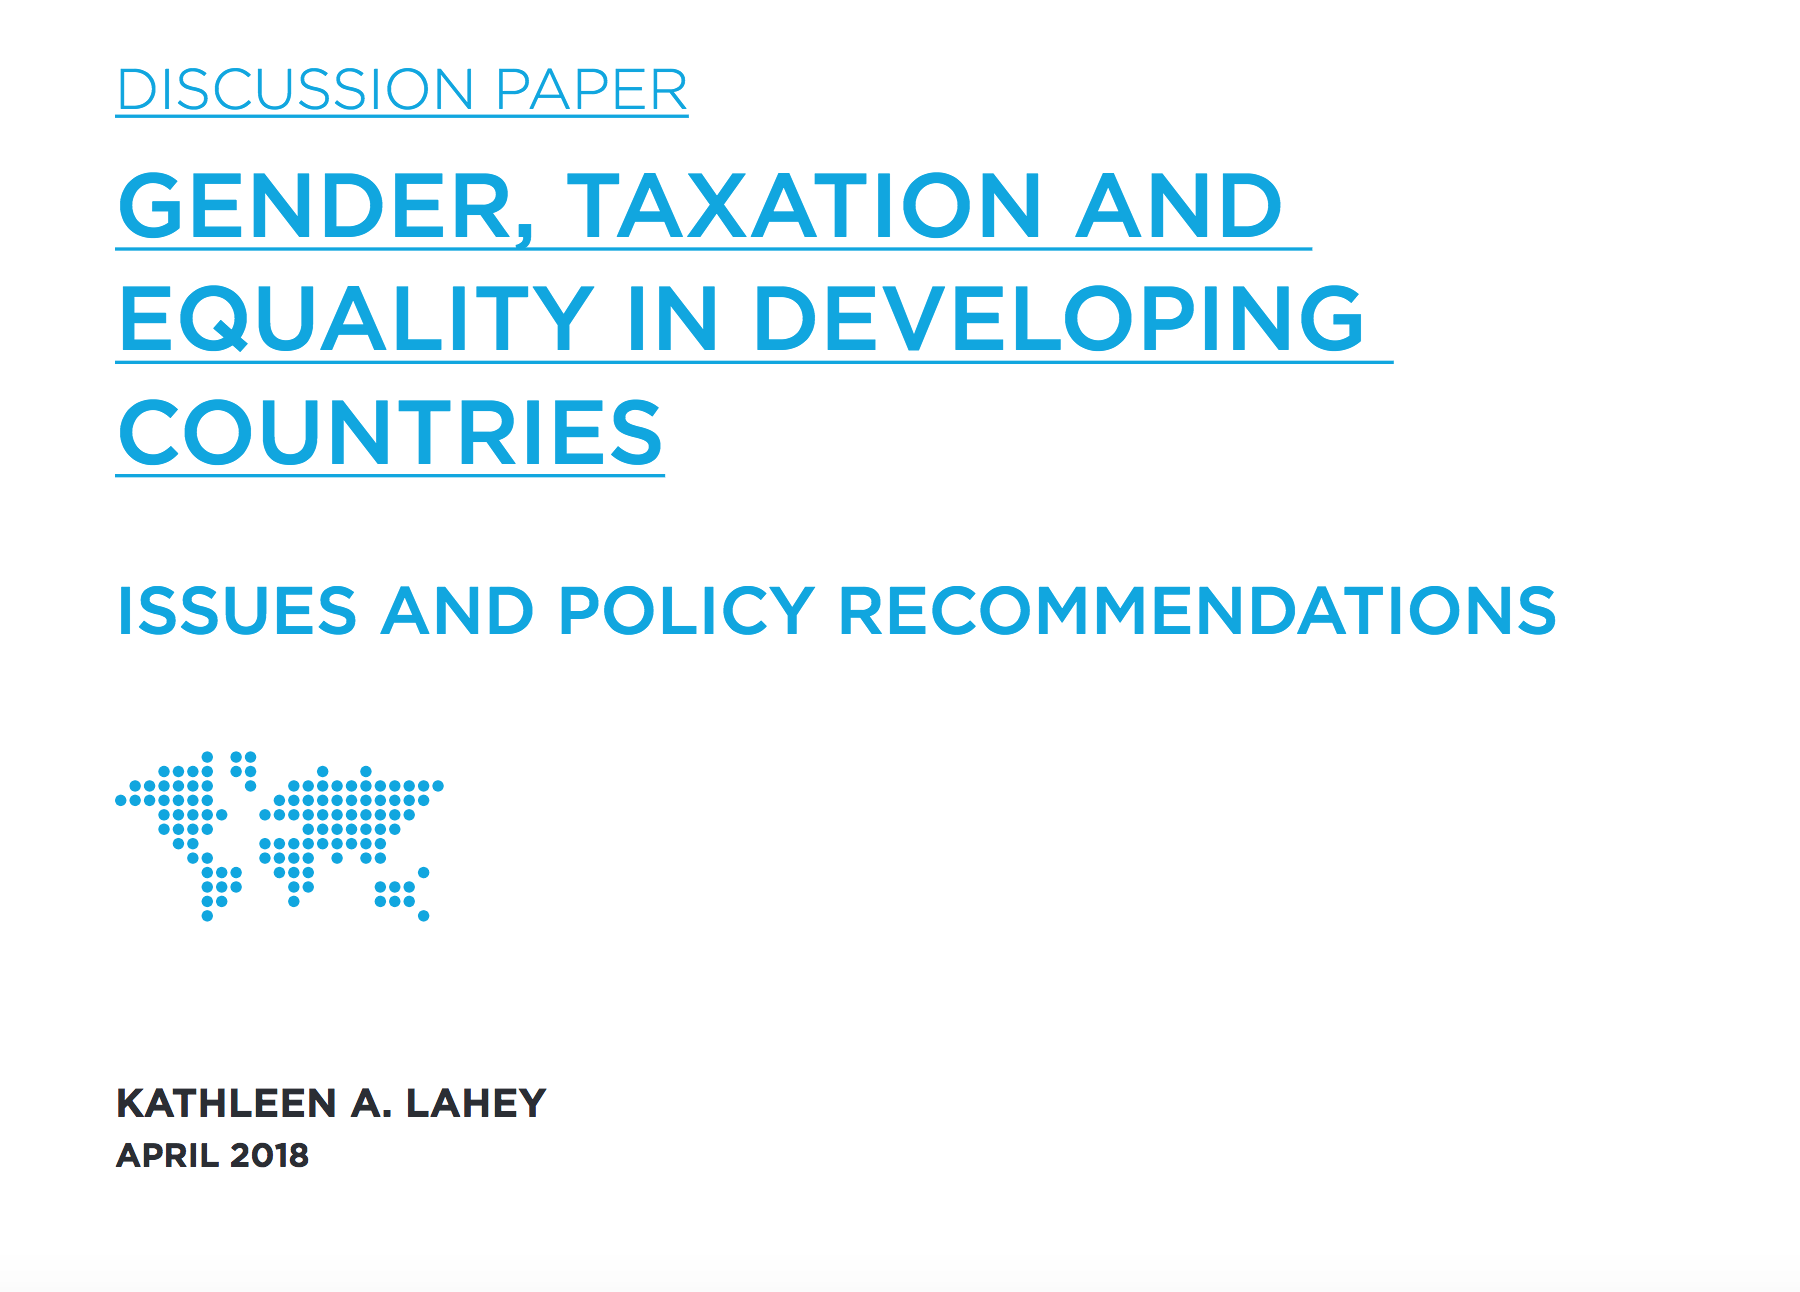 2016-05-03-Gender, Taxation And Equality In Developing Countries-EN-IMAGEM